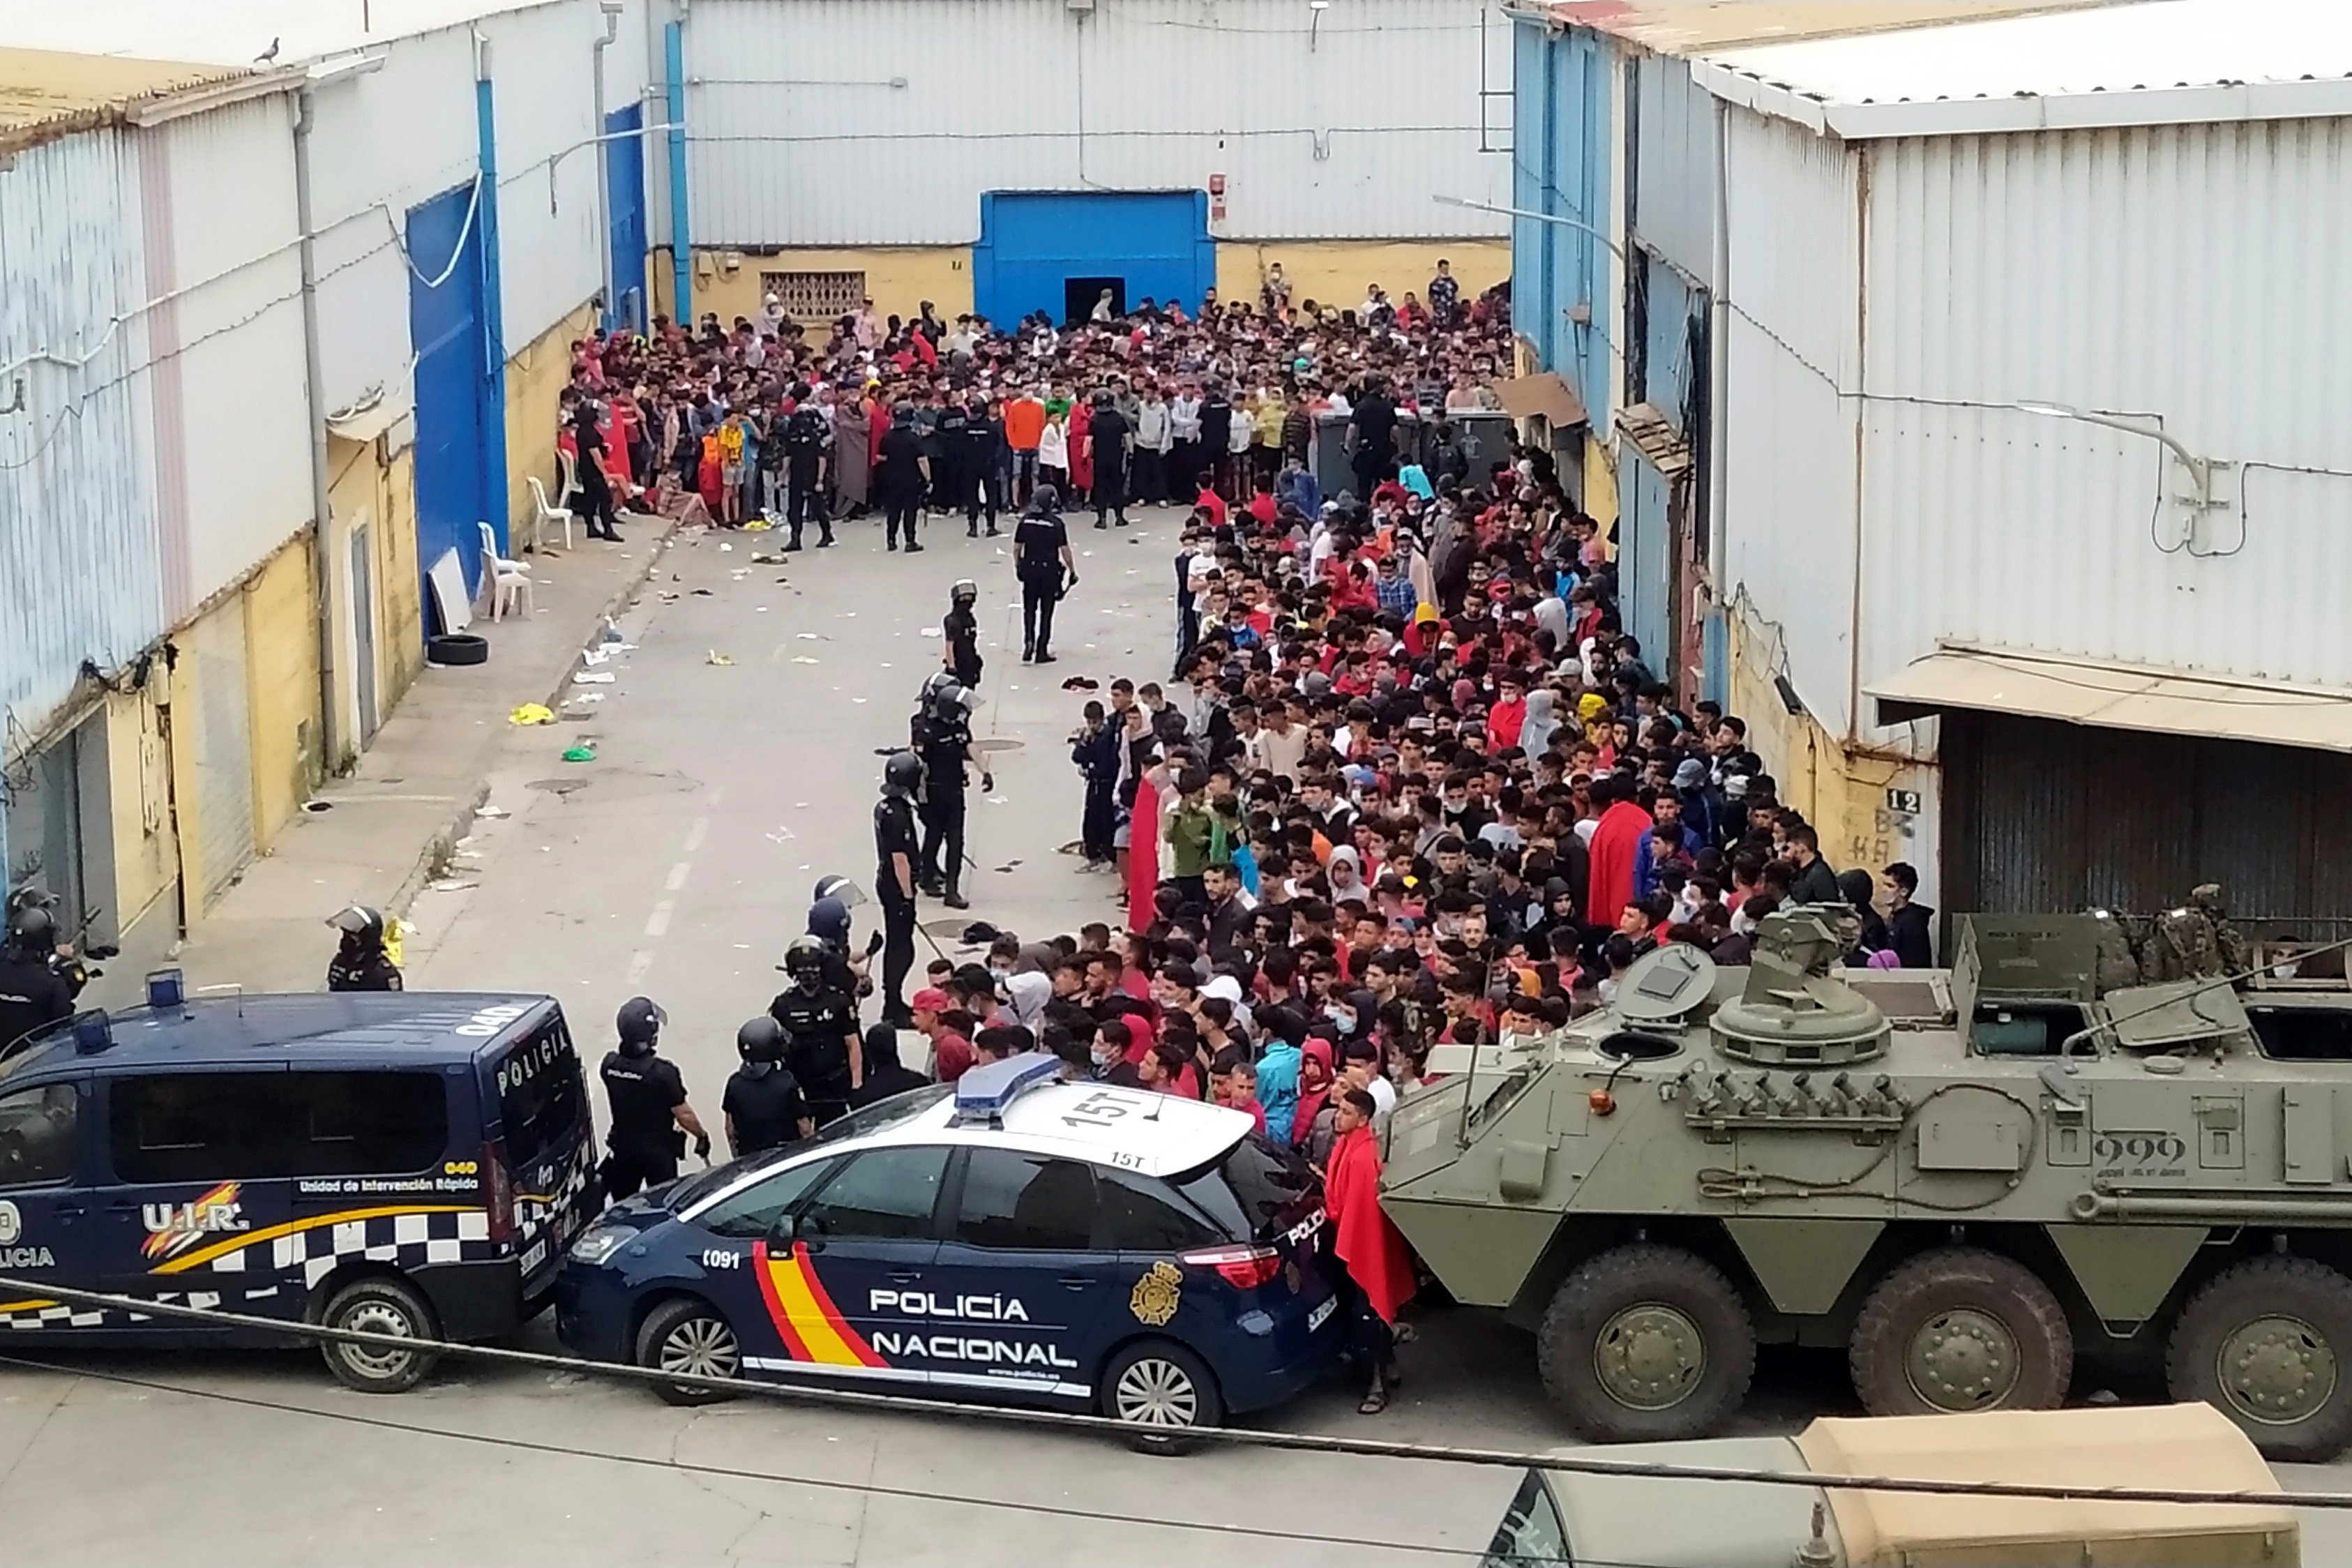 Spain militarizes Ceuta, expels thousands of migrants and promises "firmness"